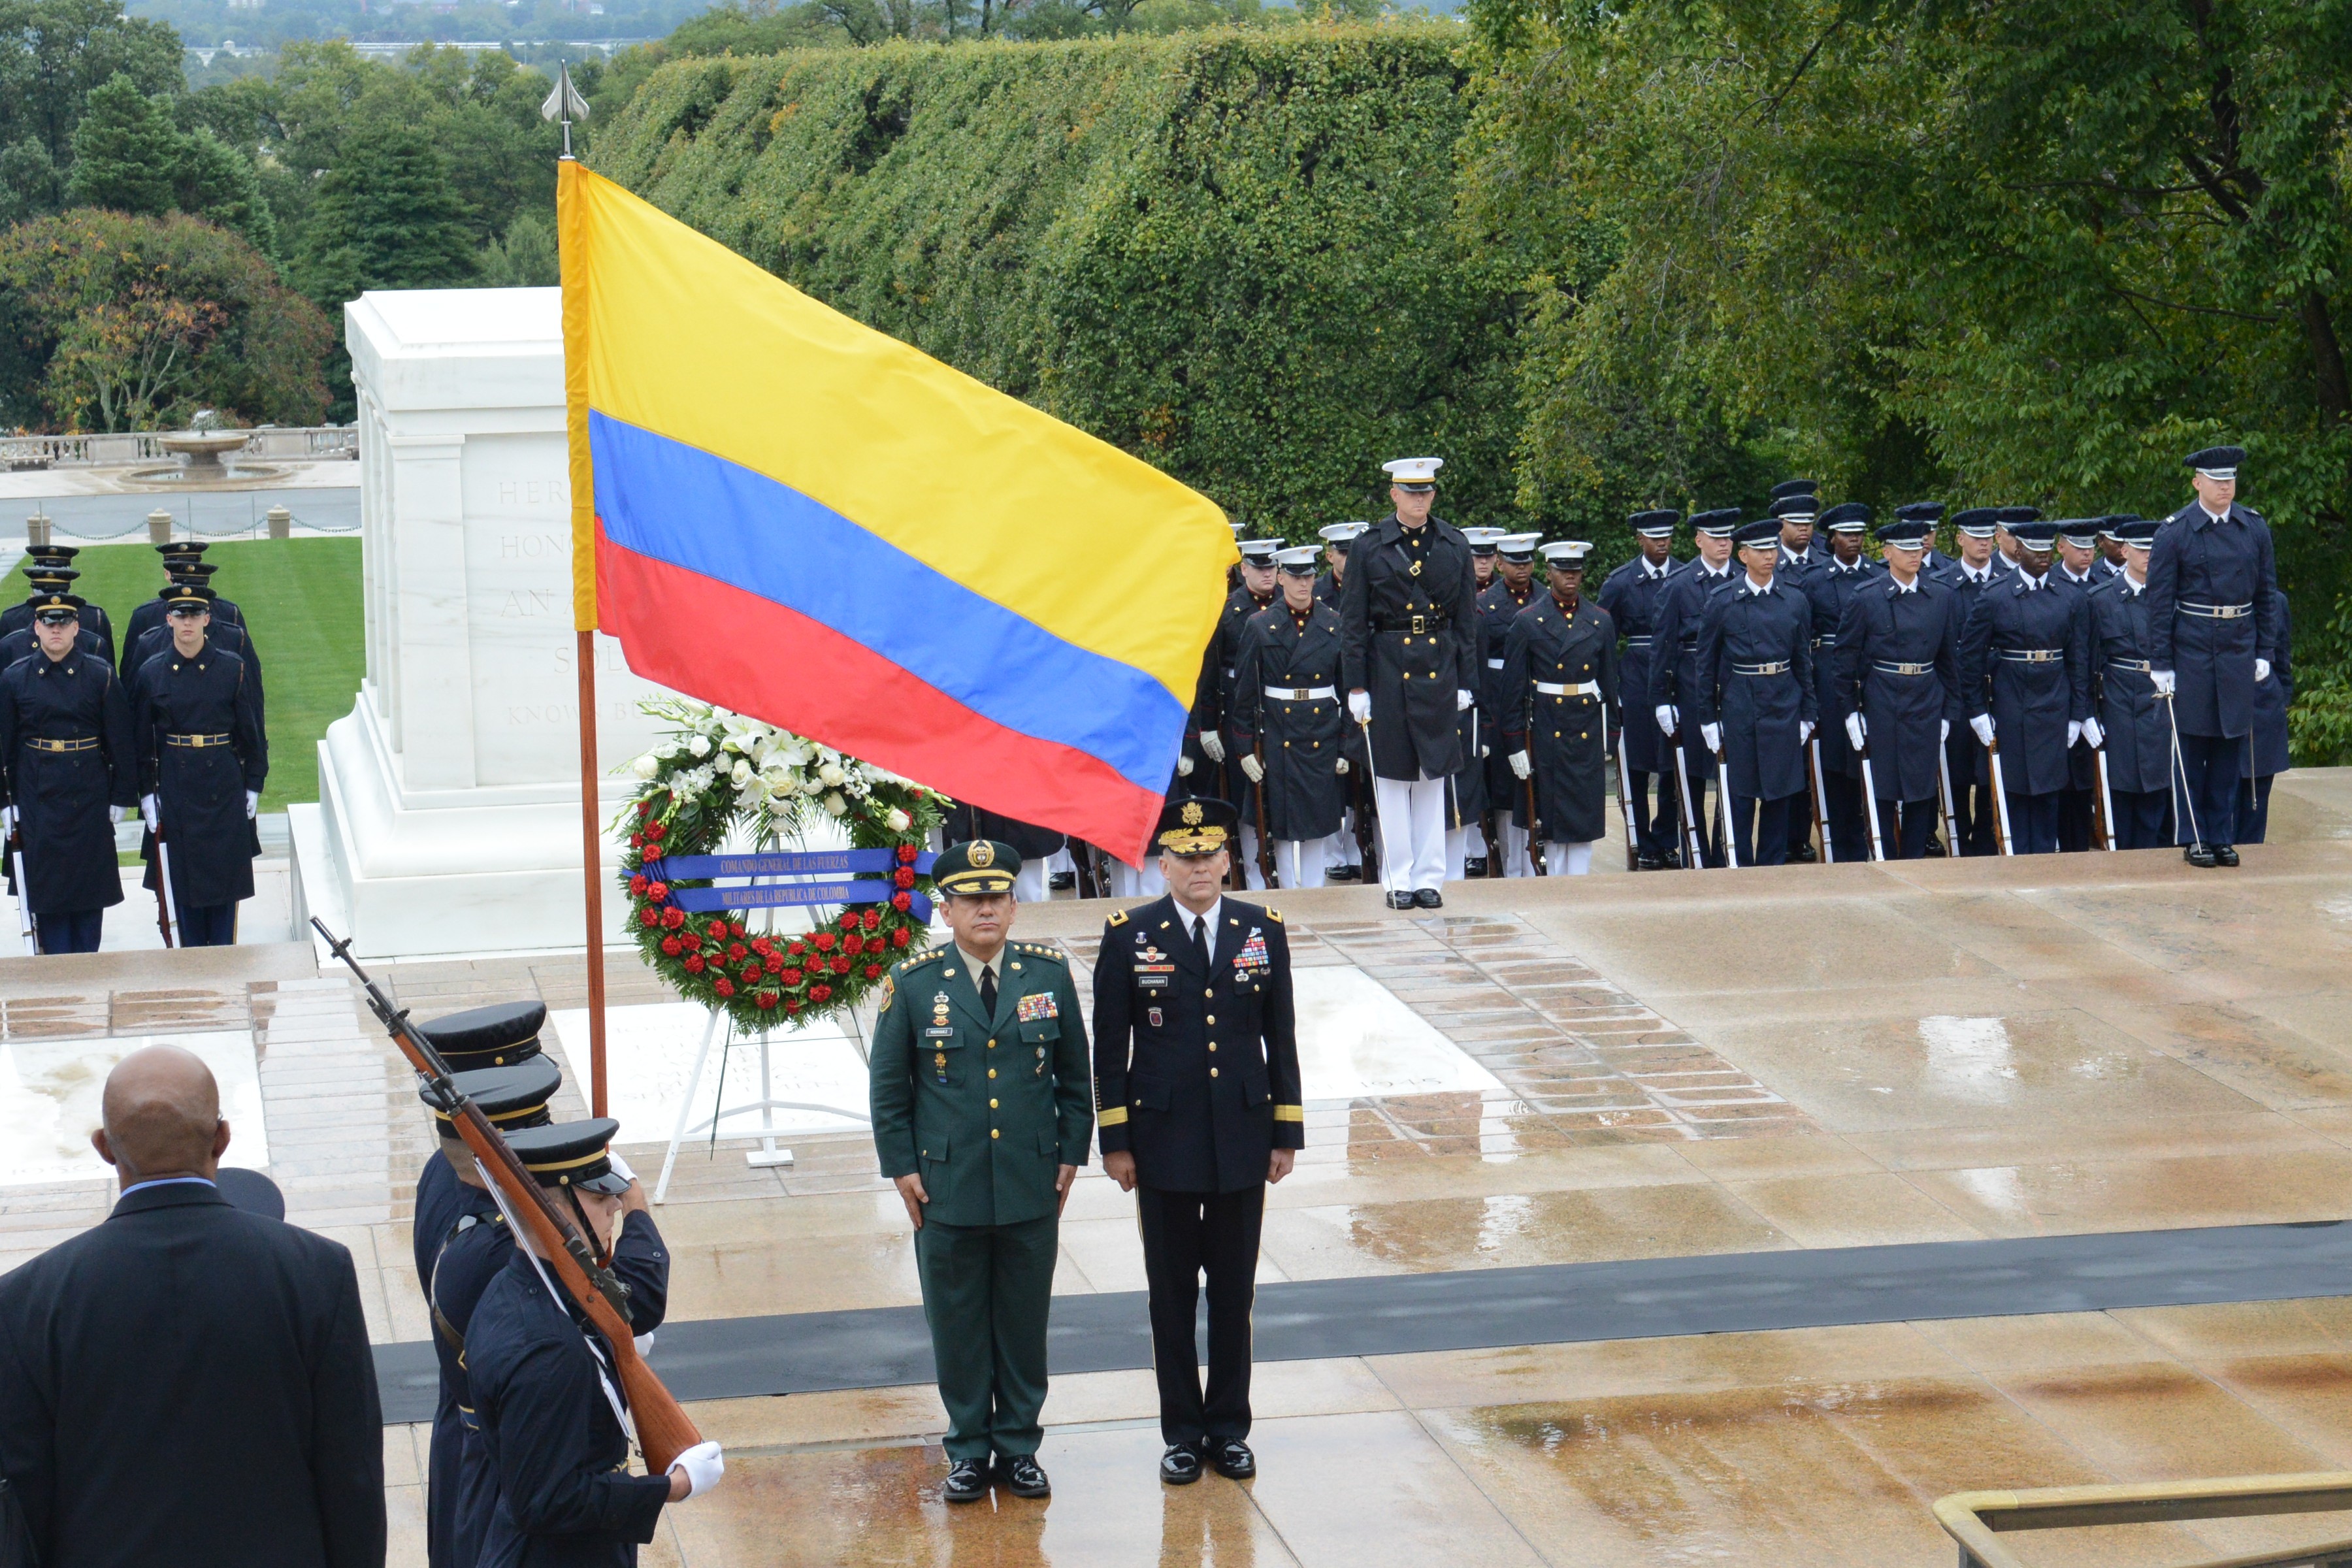 Colombia's top military official honors the fallen in the Nation's